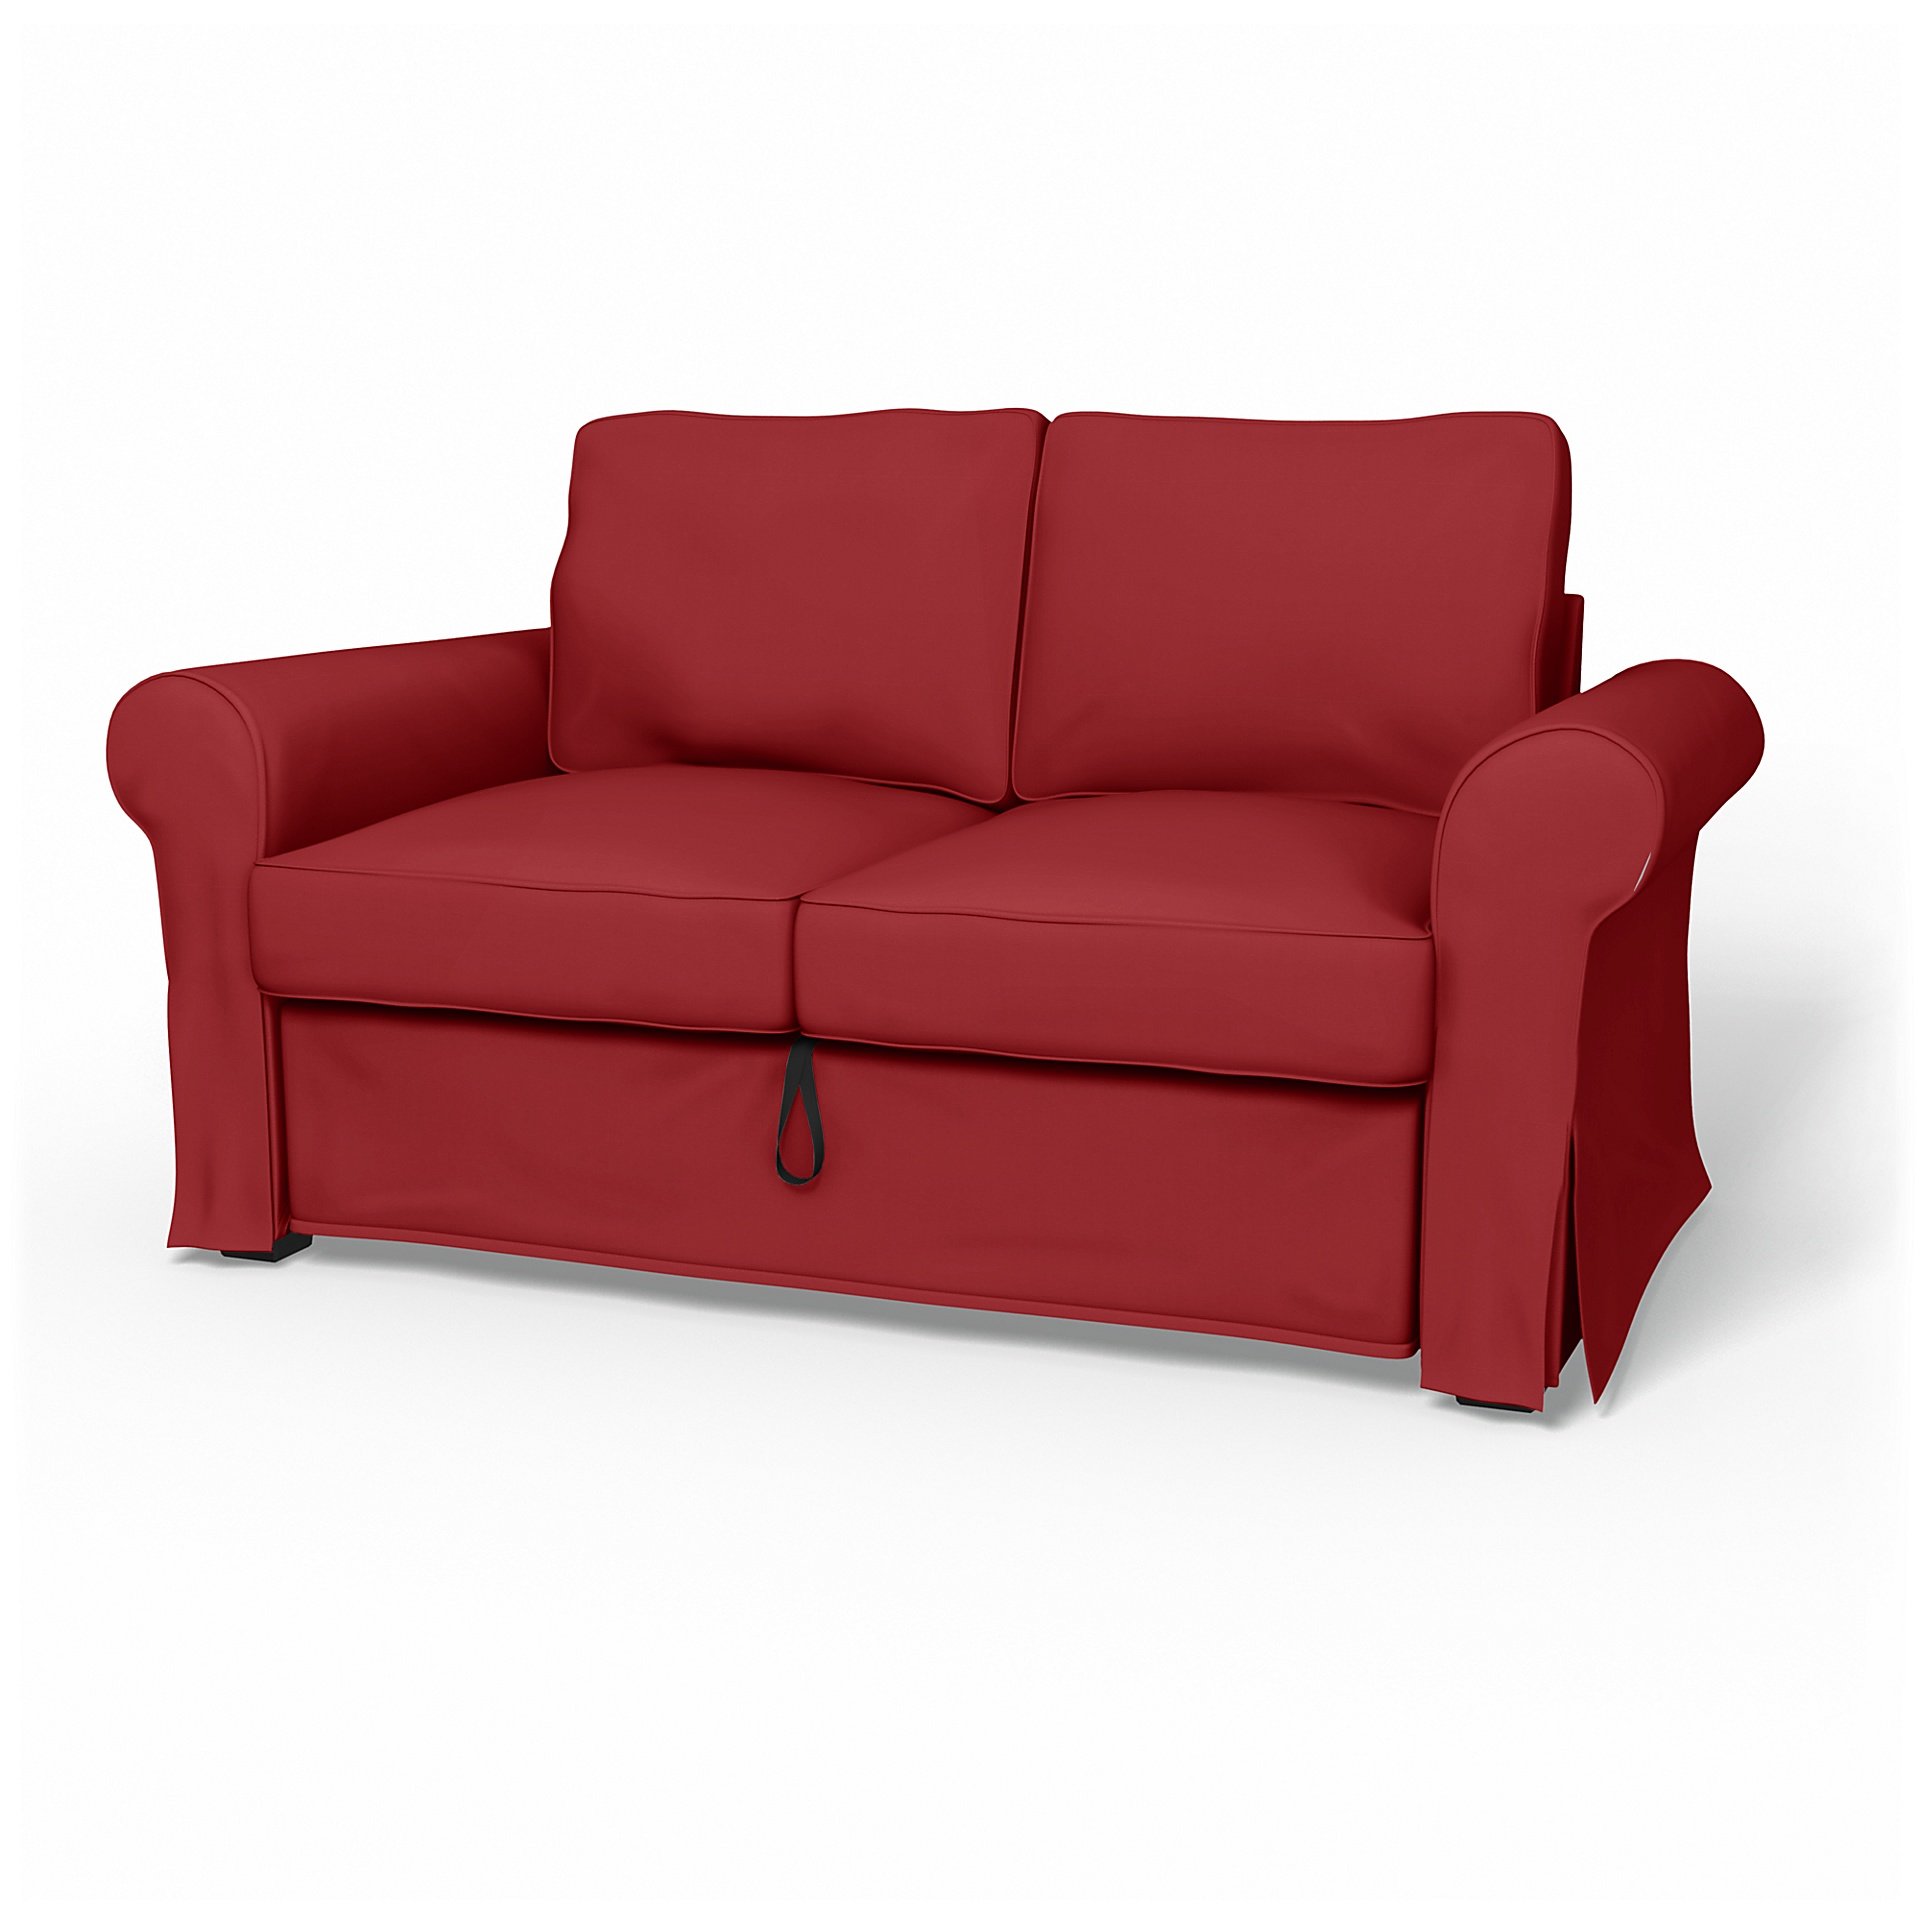 IKEA - Backabro 2 Seater Sofa Bed Cover, Scarlet Red, Cotton - Bemz